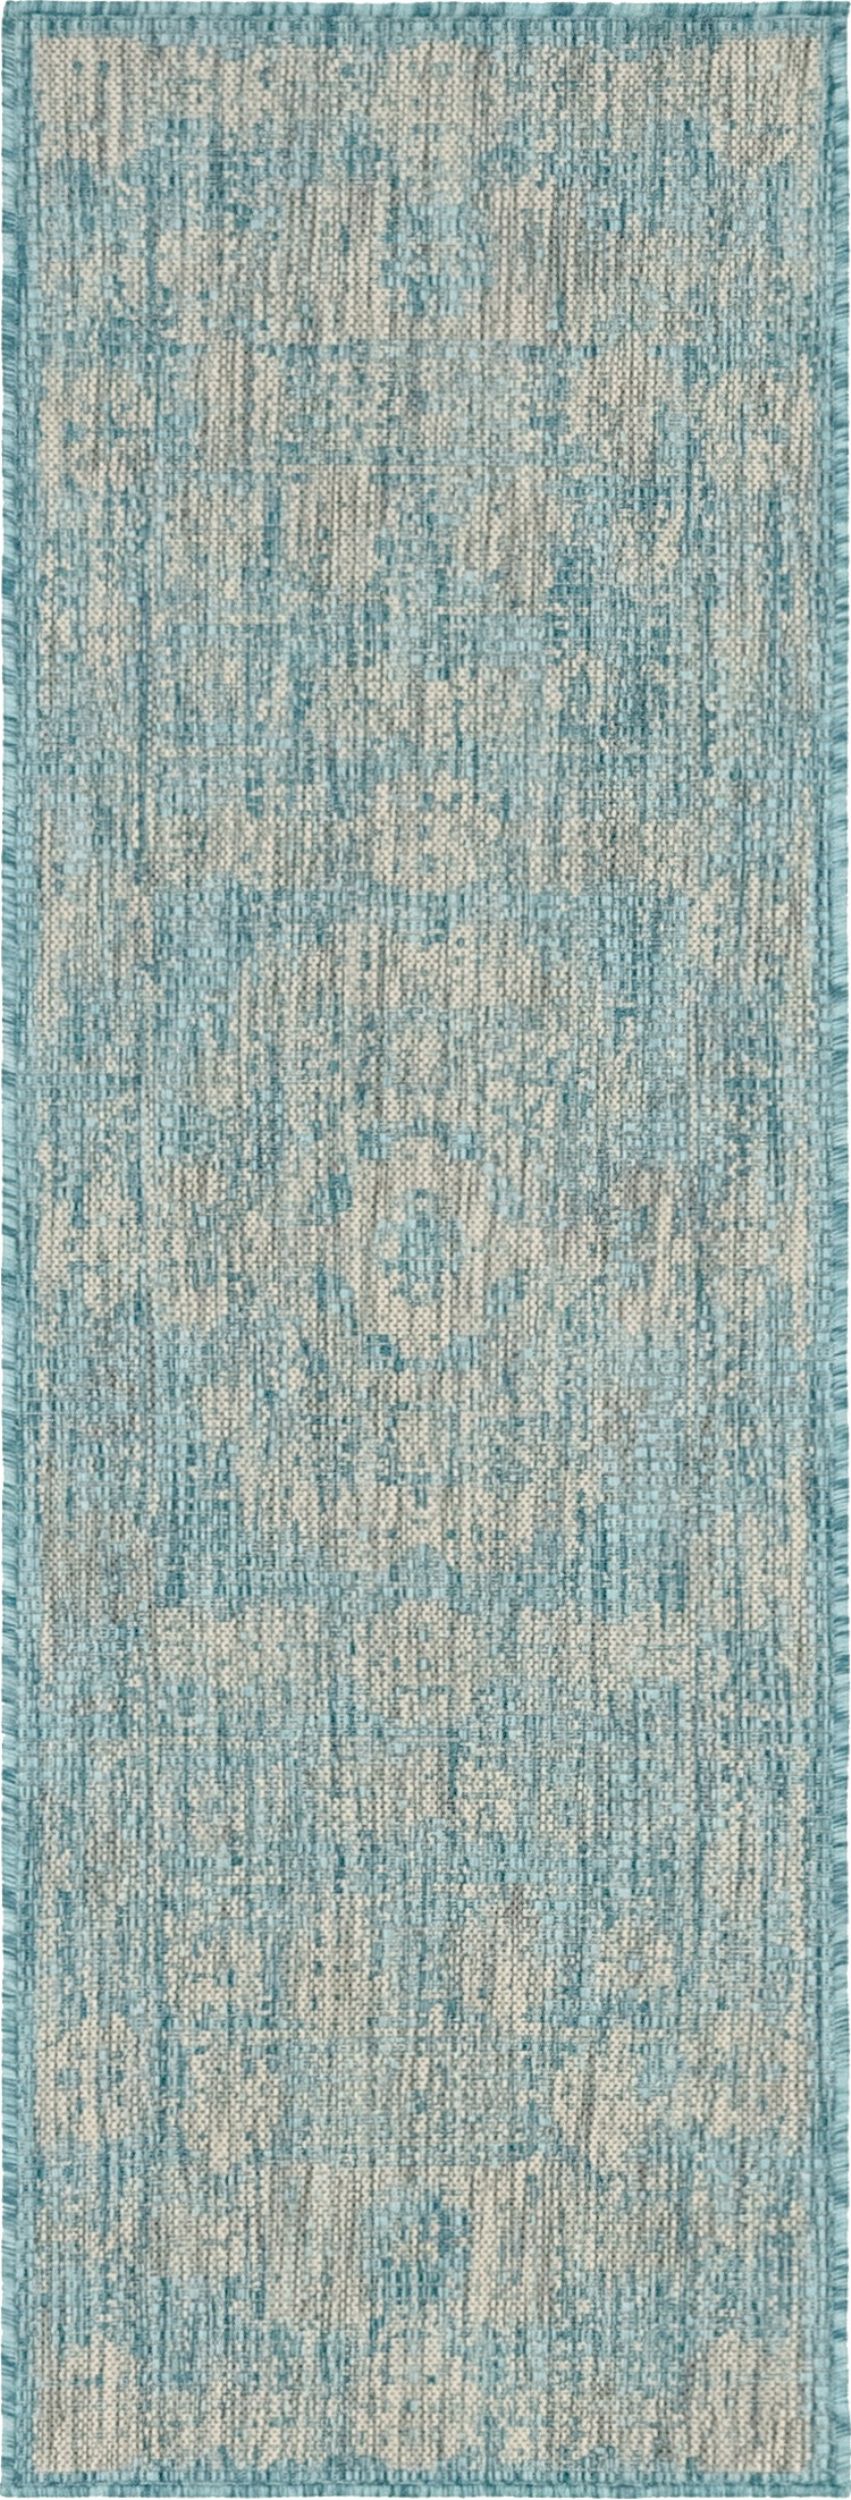 rugpal nile indoor/outdoor area rug collection